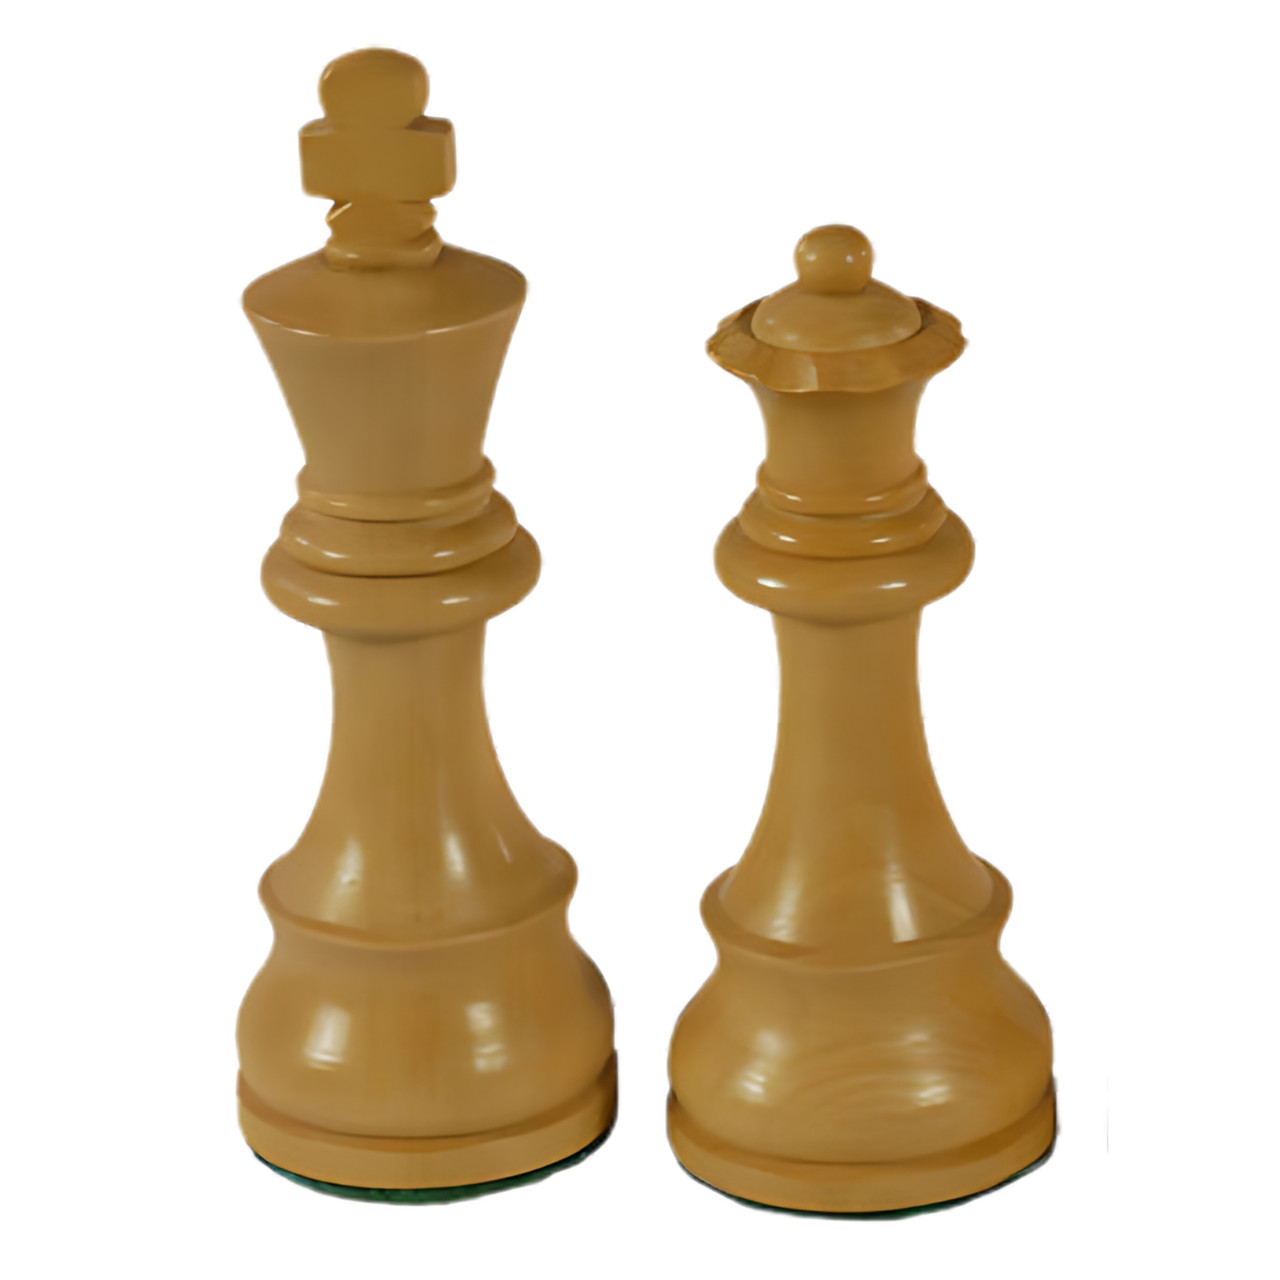 The Zeppelin - Boxwood German Knight Chess Pieces 3.75" King white king and queen